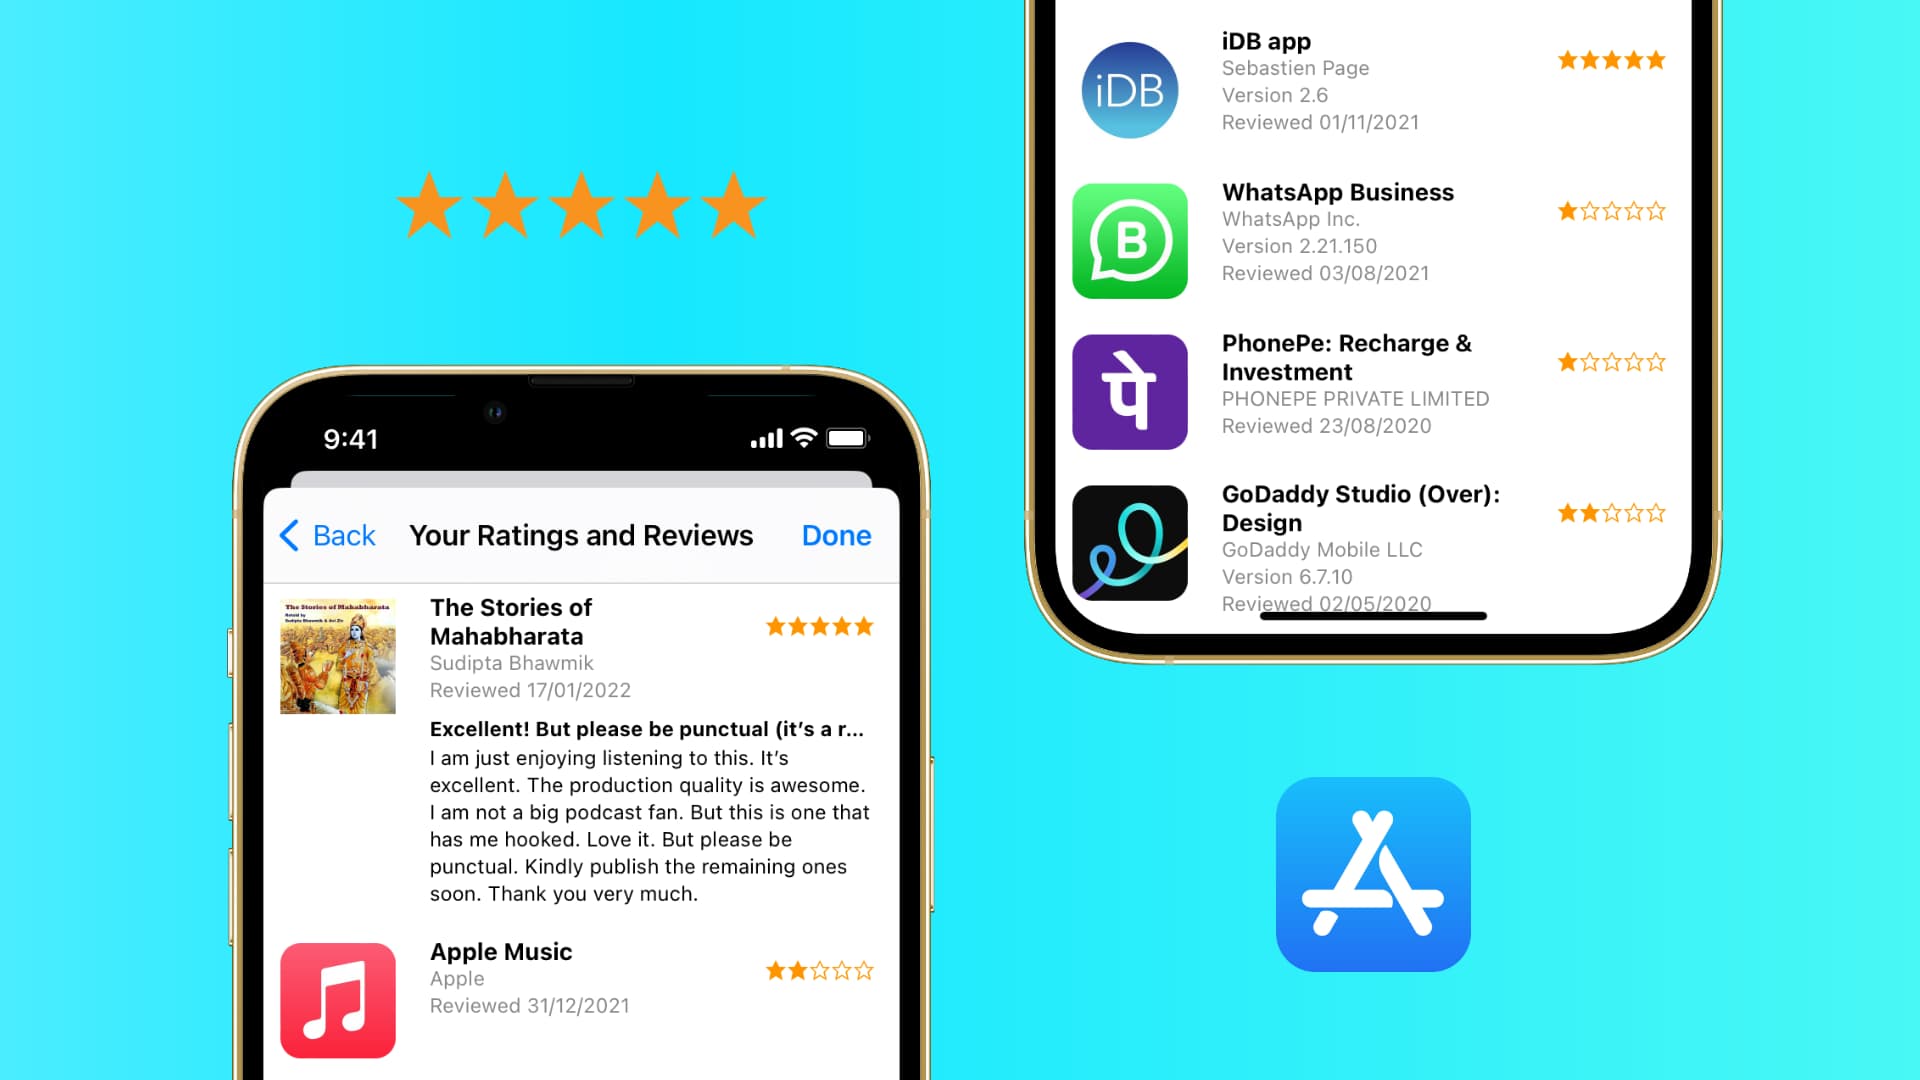 See all your App Store ratings and reviews on iPhone